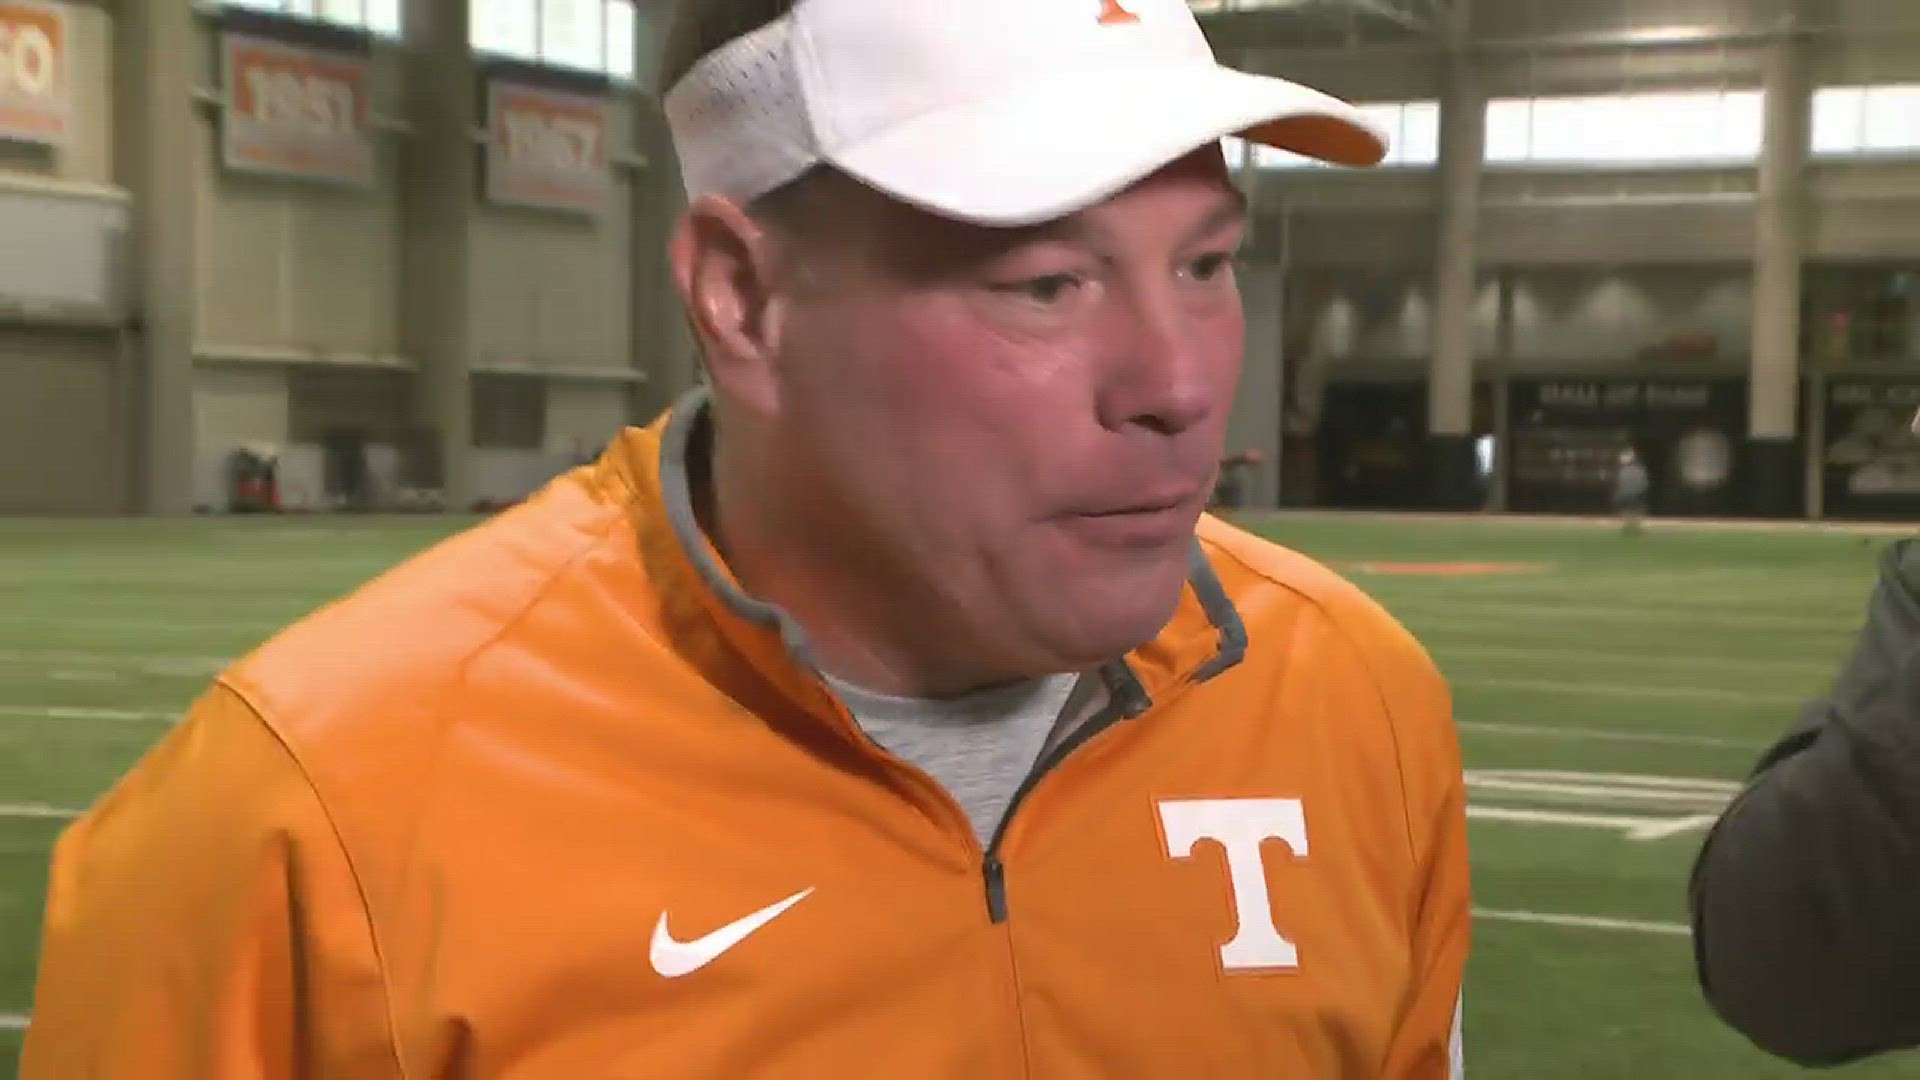 Butch Jones speaks to the media following Tuesday's practice in preparation for the Music City Bowl game versus Nebraska.